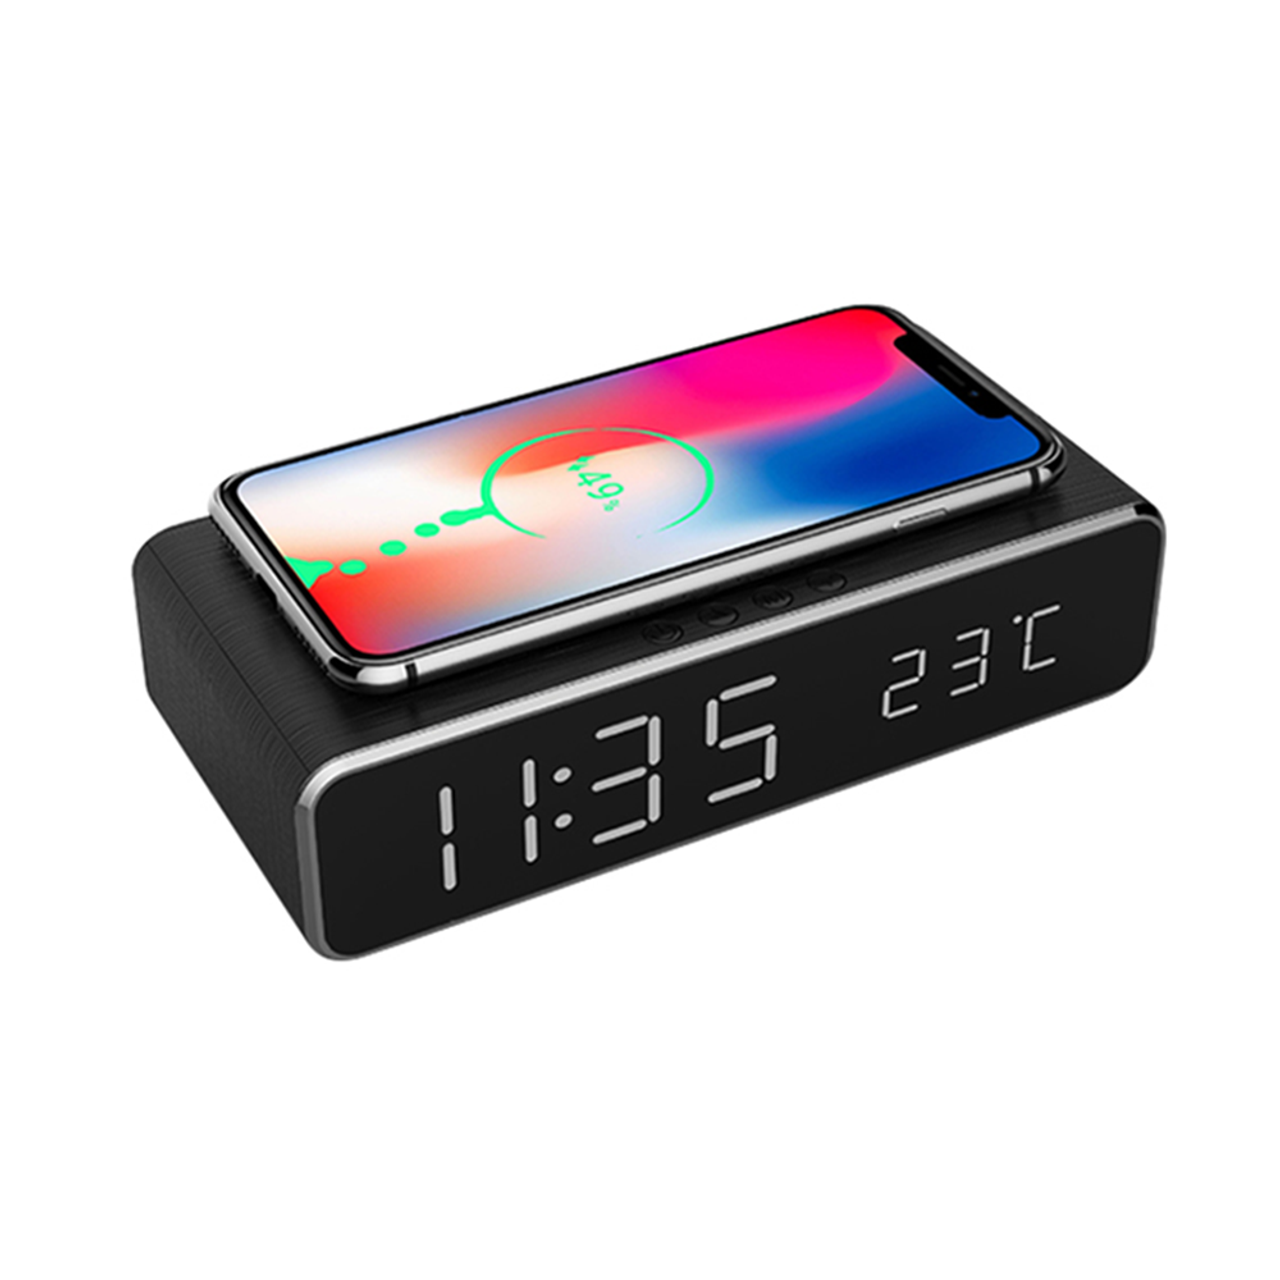 LED Alarm Clock with Wireless Charger and USB Port product image